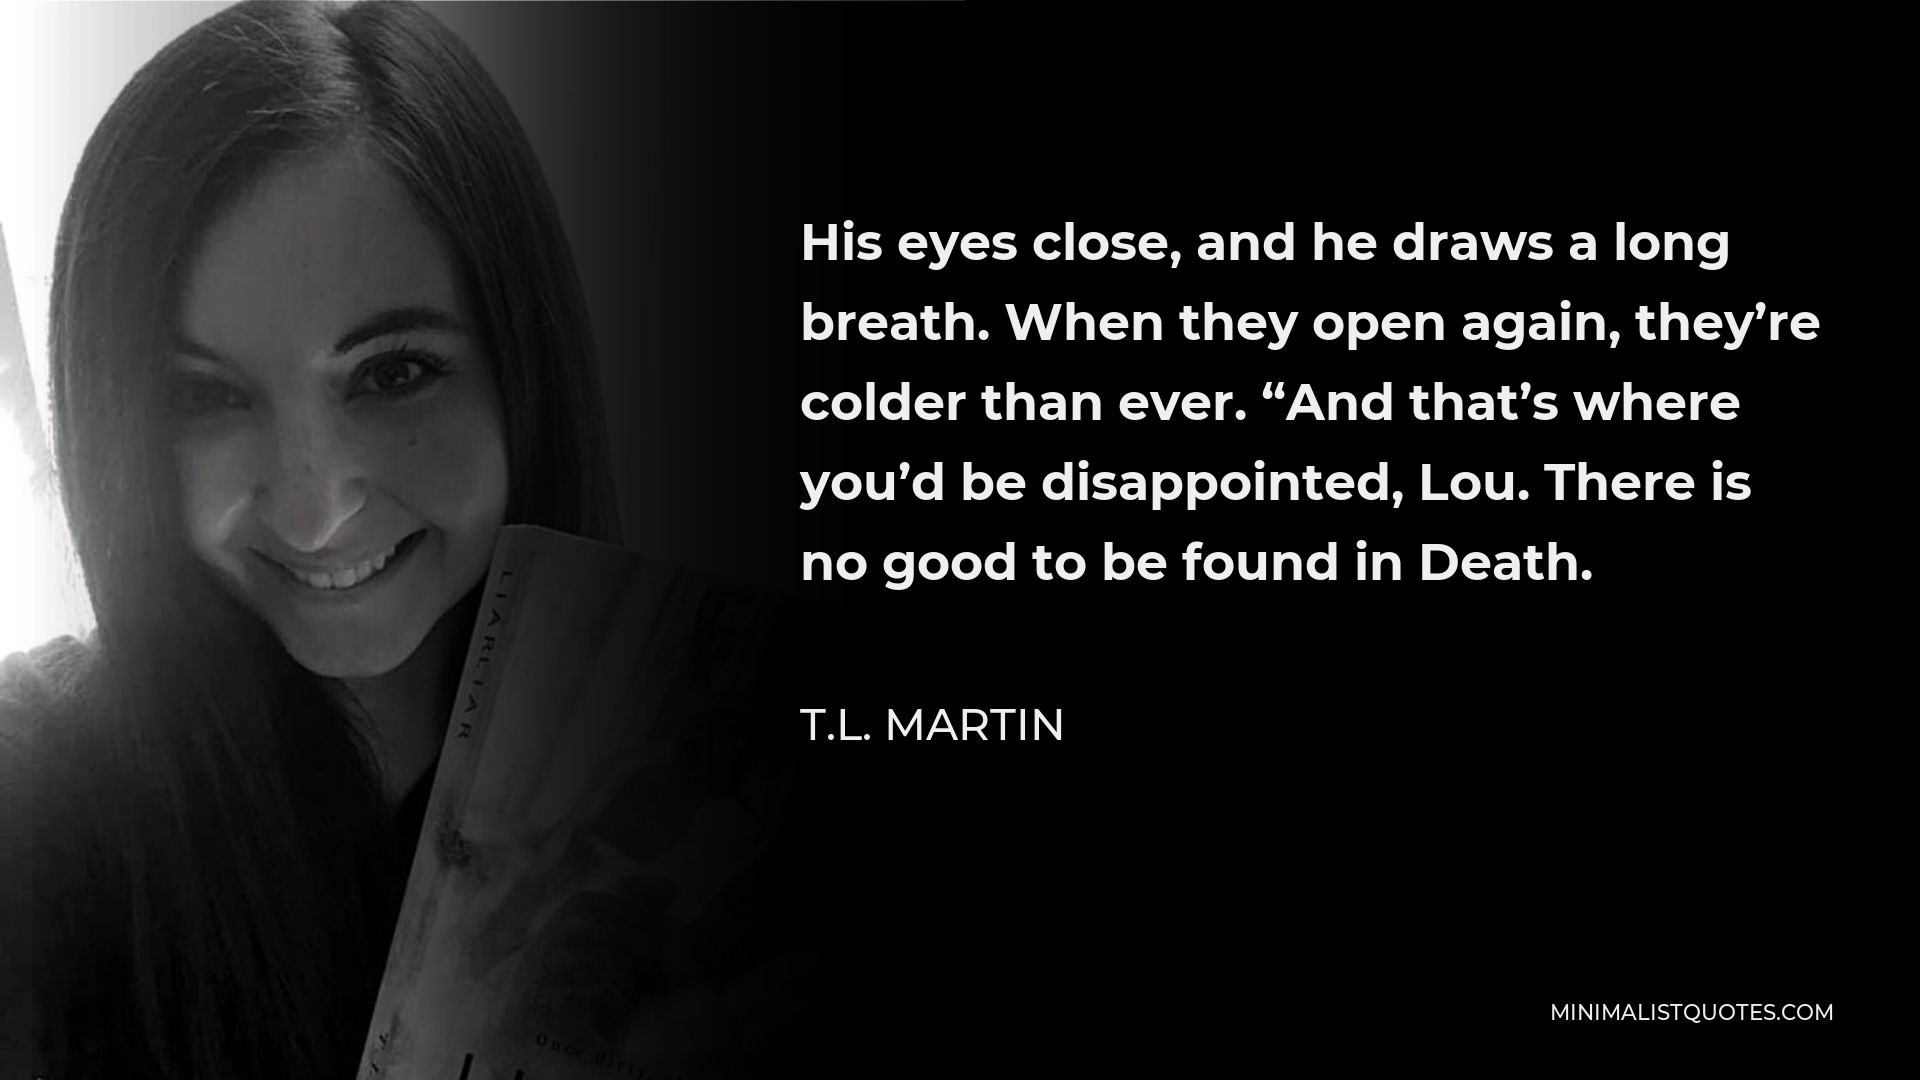 T.L. Martin Quote - His eyes close, and he draws a long breath. When they open again, they’re colder than ever. “And that’s where you’d be disappointed, Lou.There is no good to be found in Death.